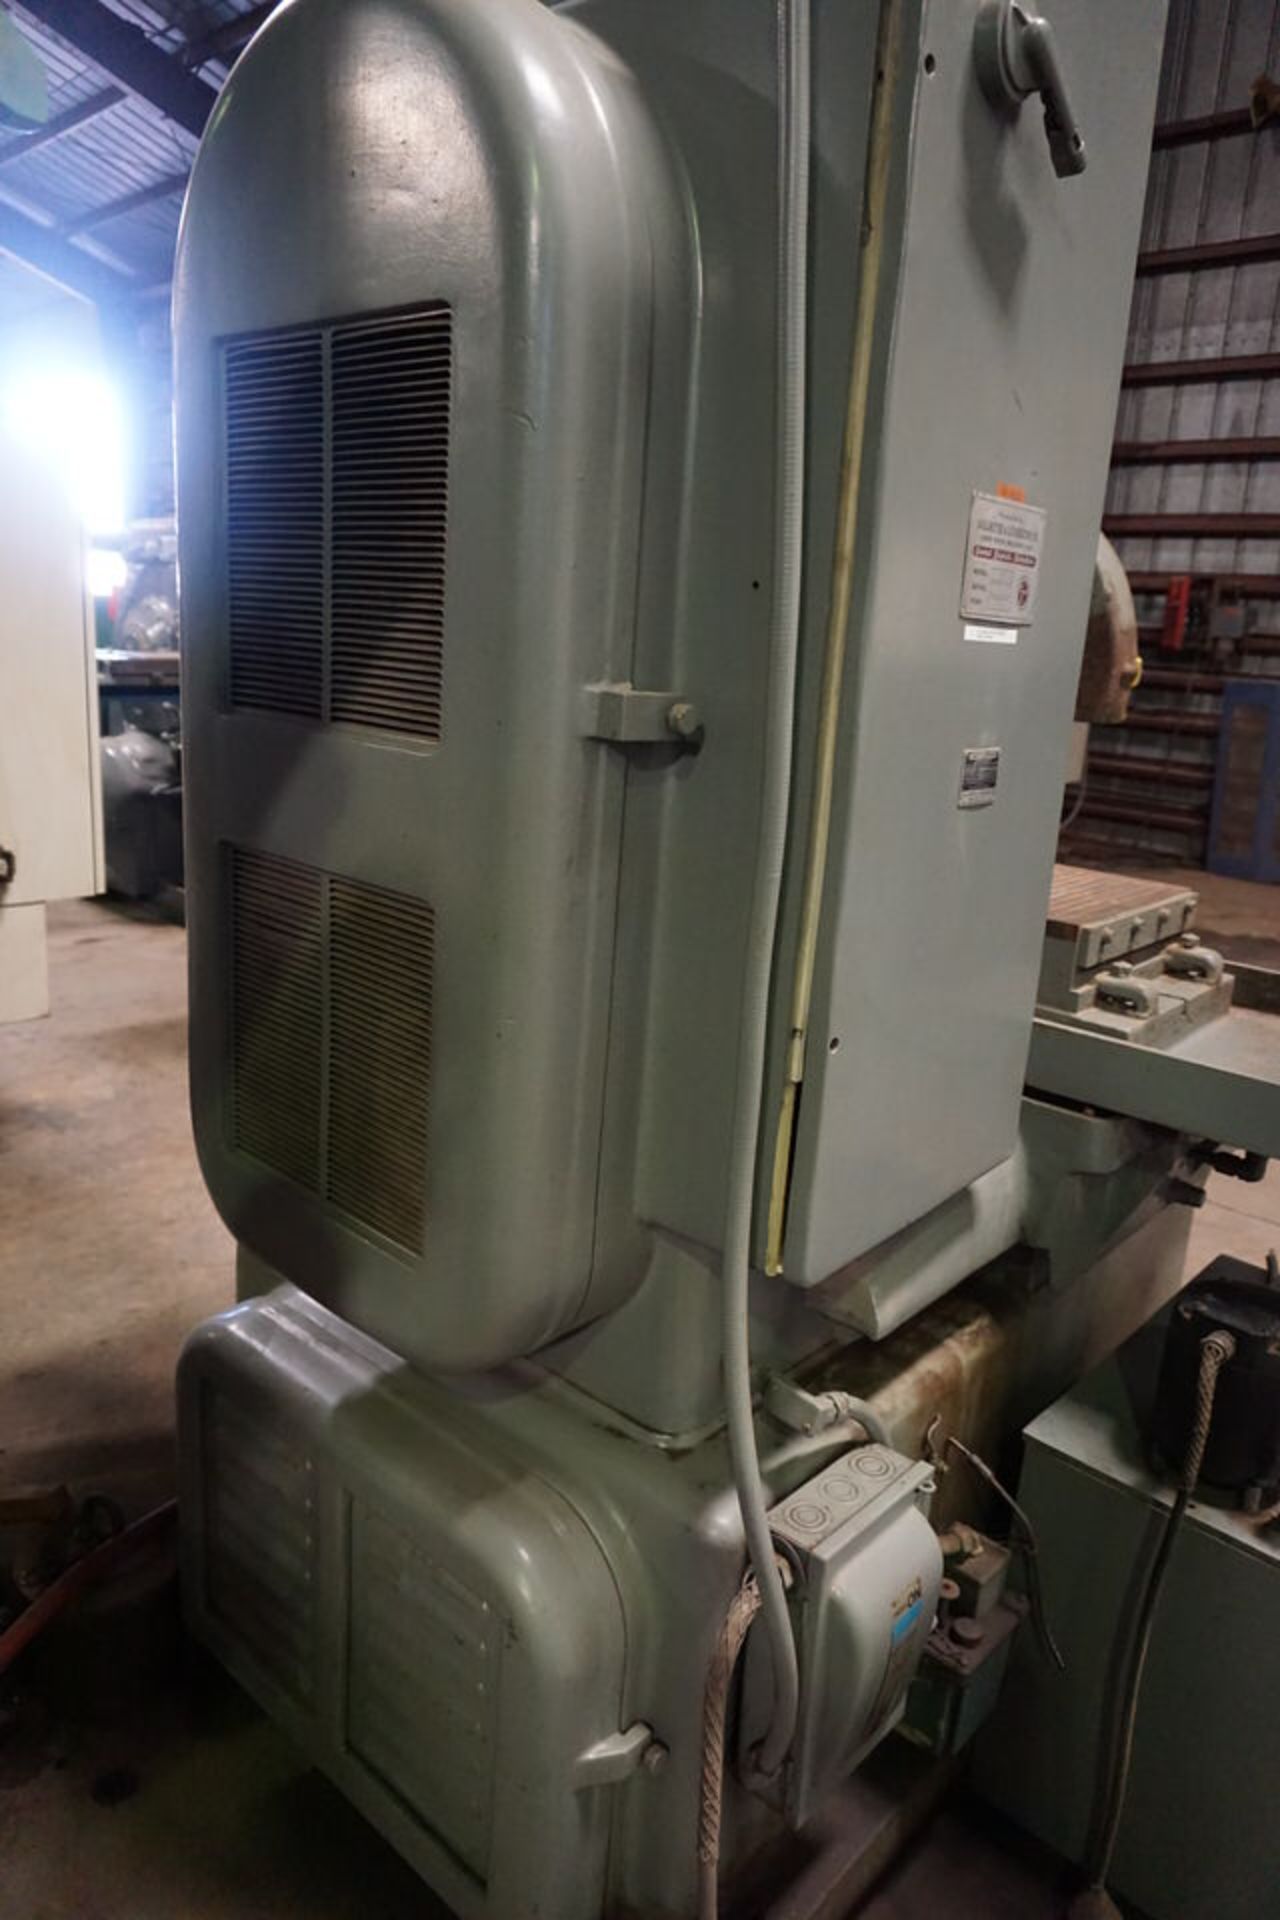 GRAND RAPIDS SURFACE GRINDER, MDL: 470, 18" X 24" MAG CHUCK, PUSH BUTTON CTRL - Image 11 of 14